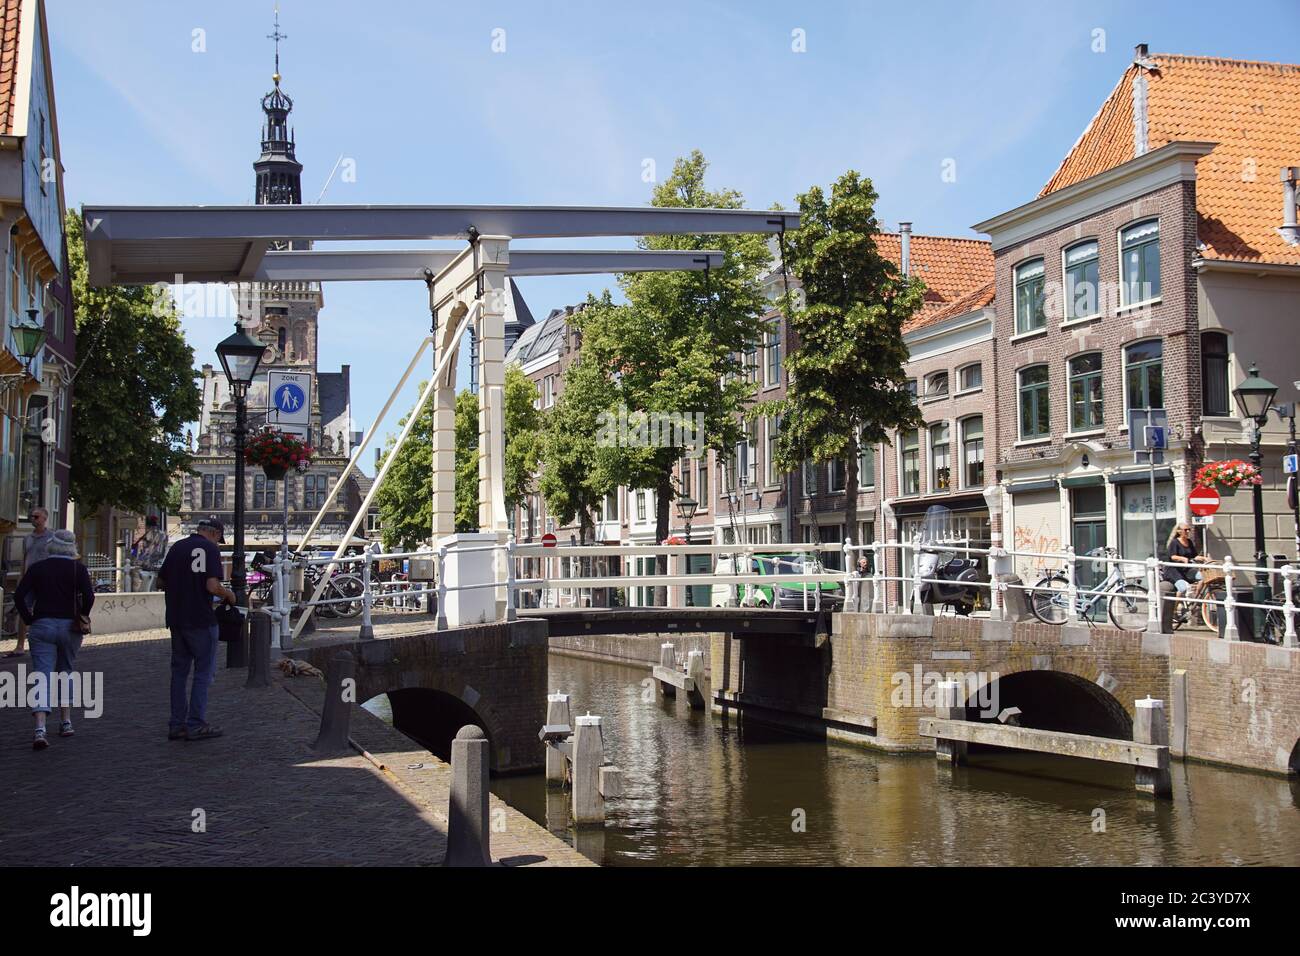 De Waag (Weighing house) at Waagplein square in Alkmaar and a drawbridge (Kuipersbrug). The Netherlands. Seen from Luttik Oudorp canal. Stock Photo